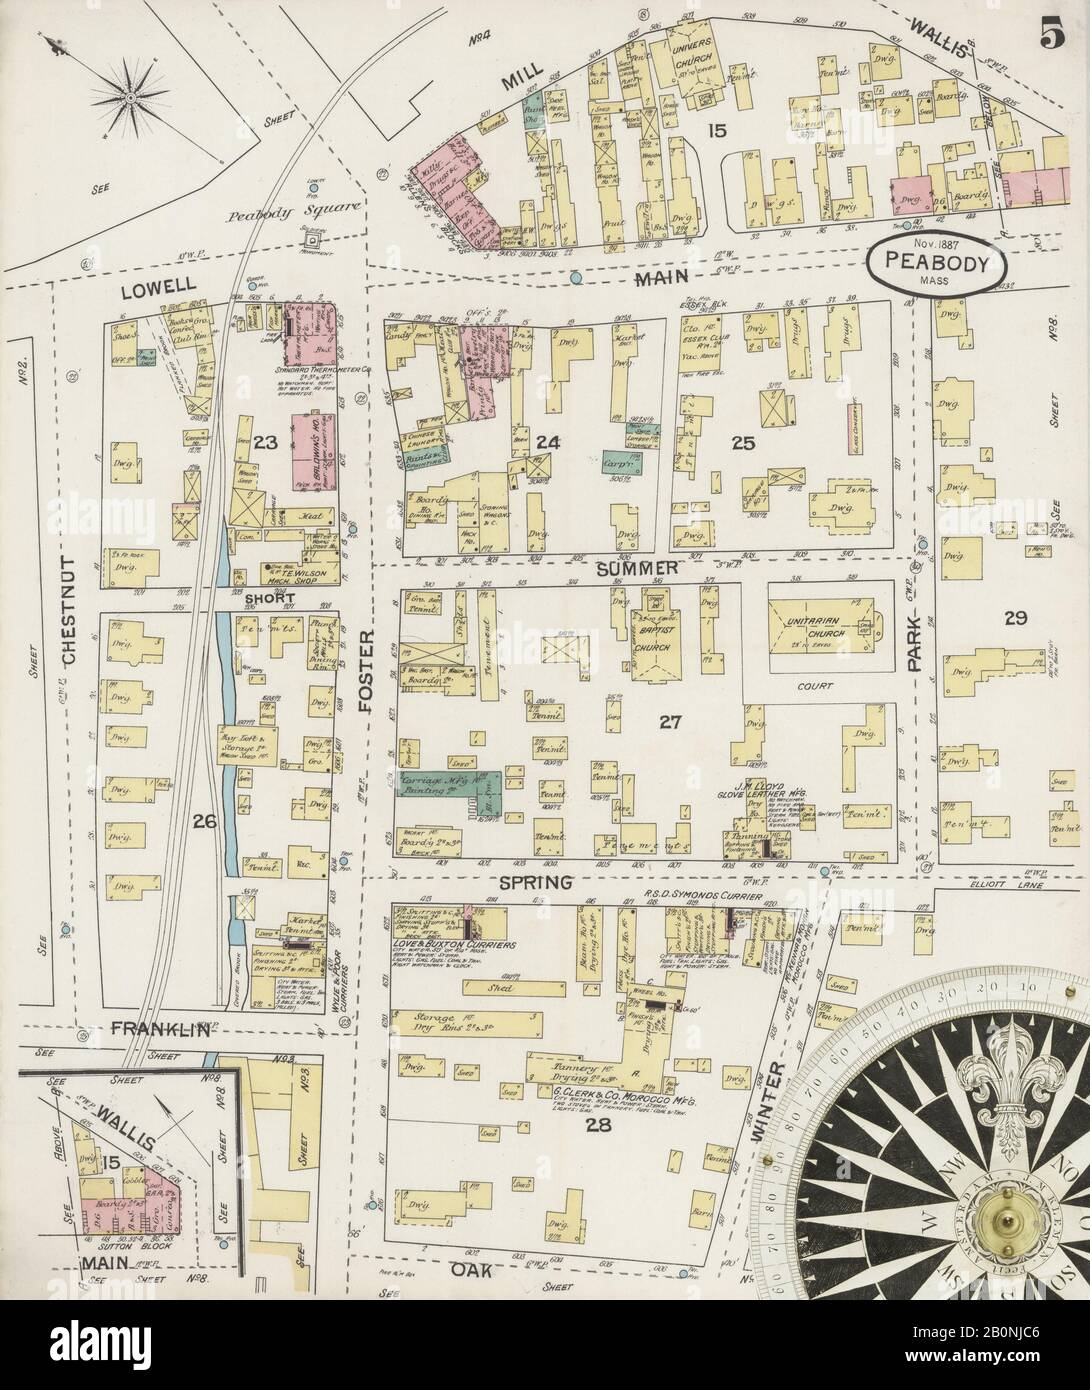 Image 5 Of Sanborn Fire Insurance Map From Peabody Essex County